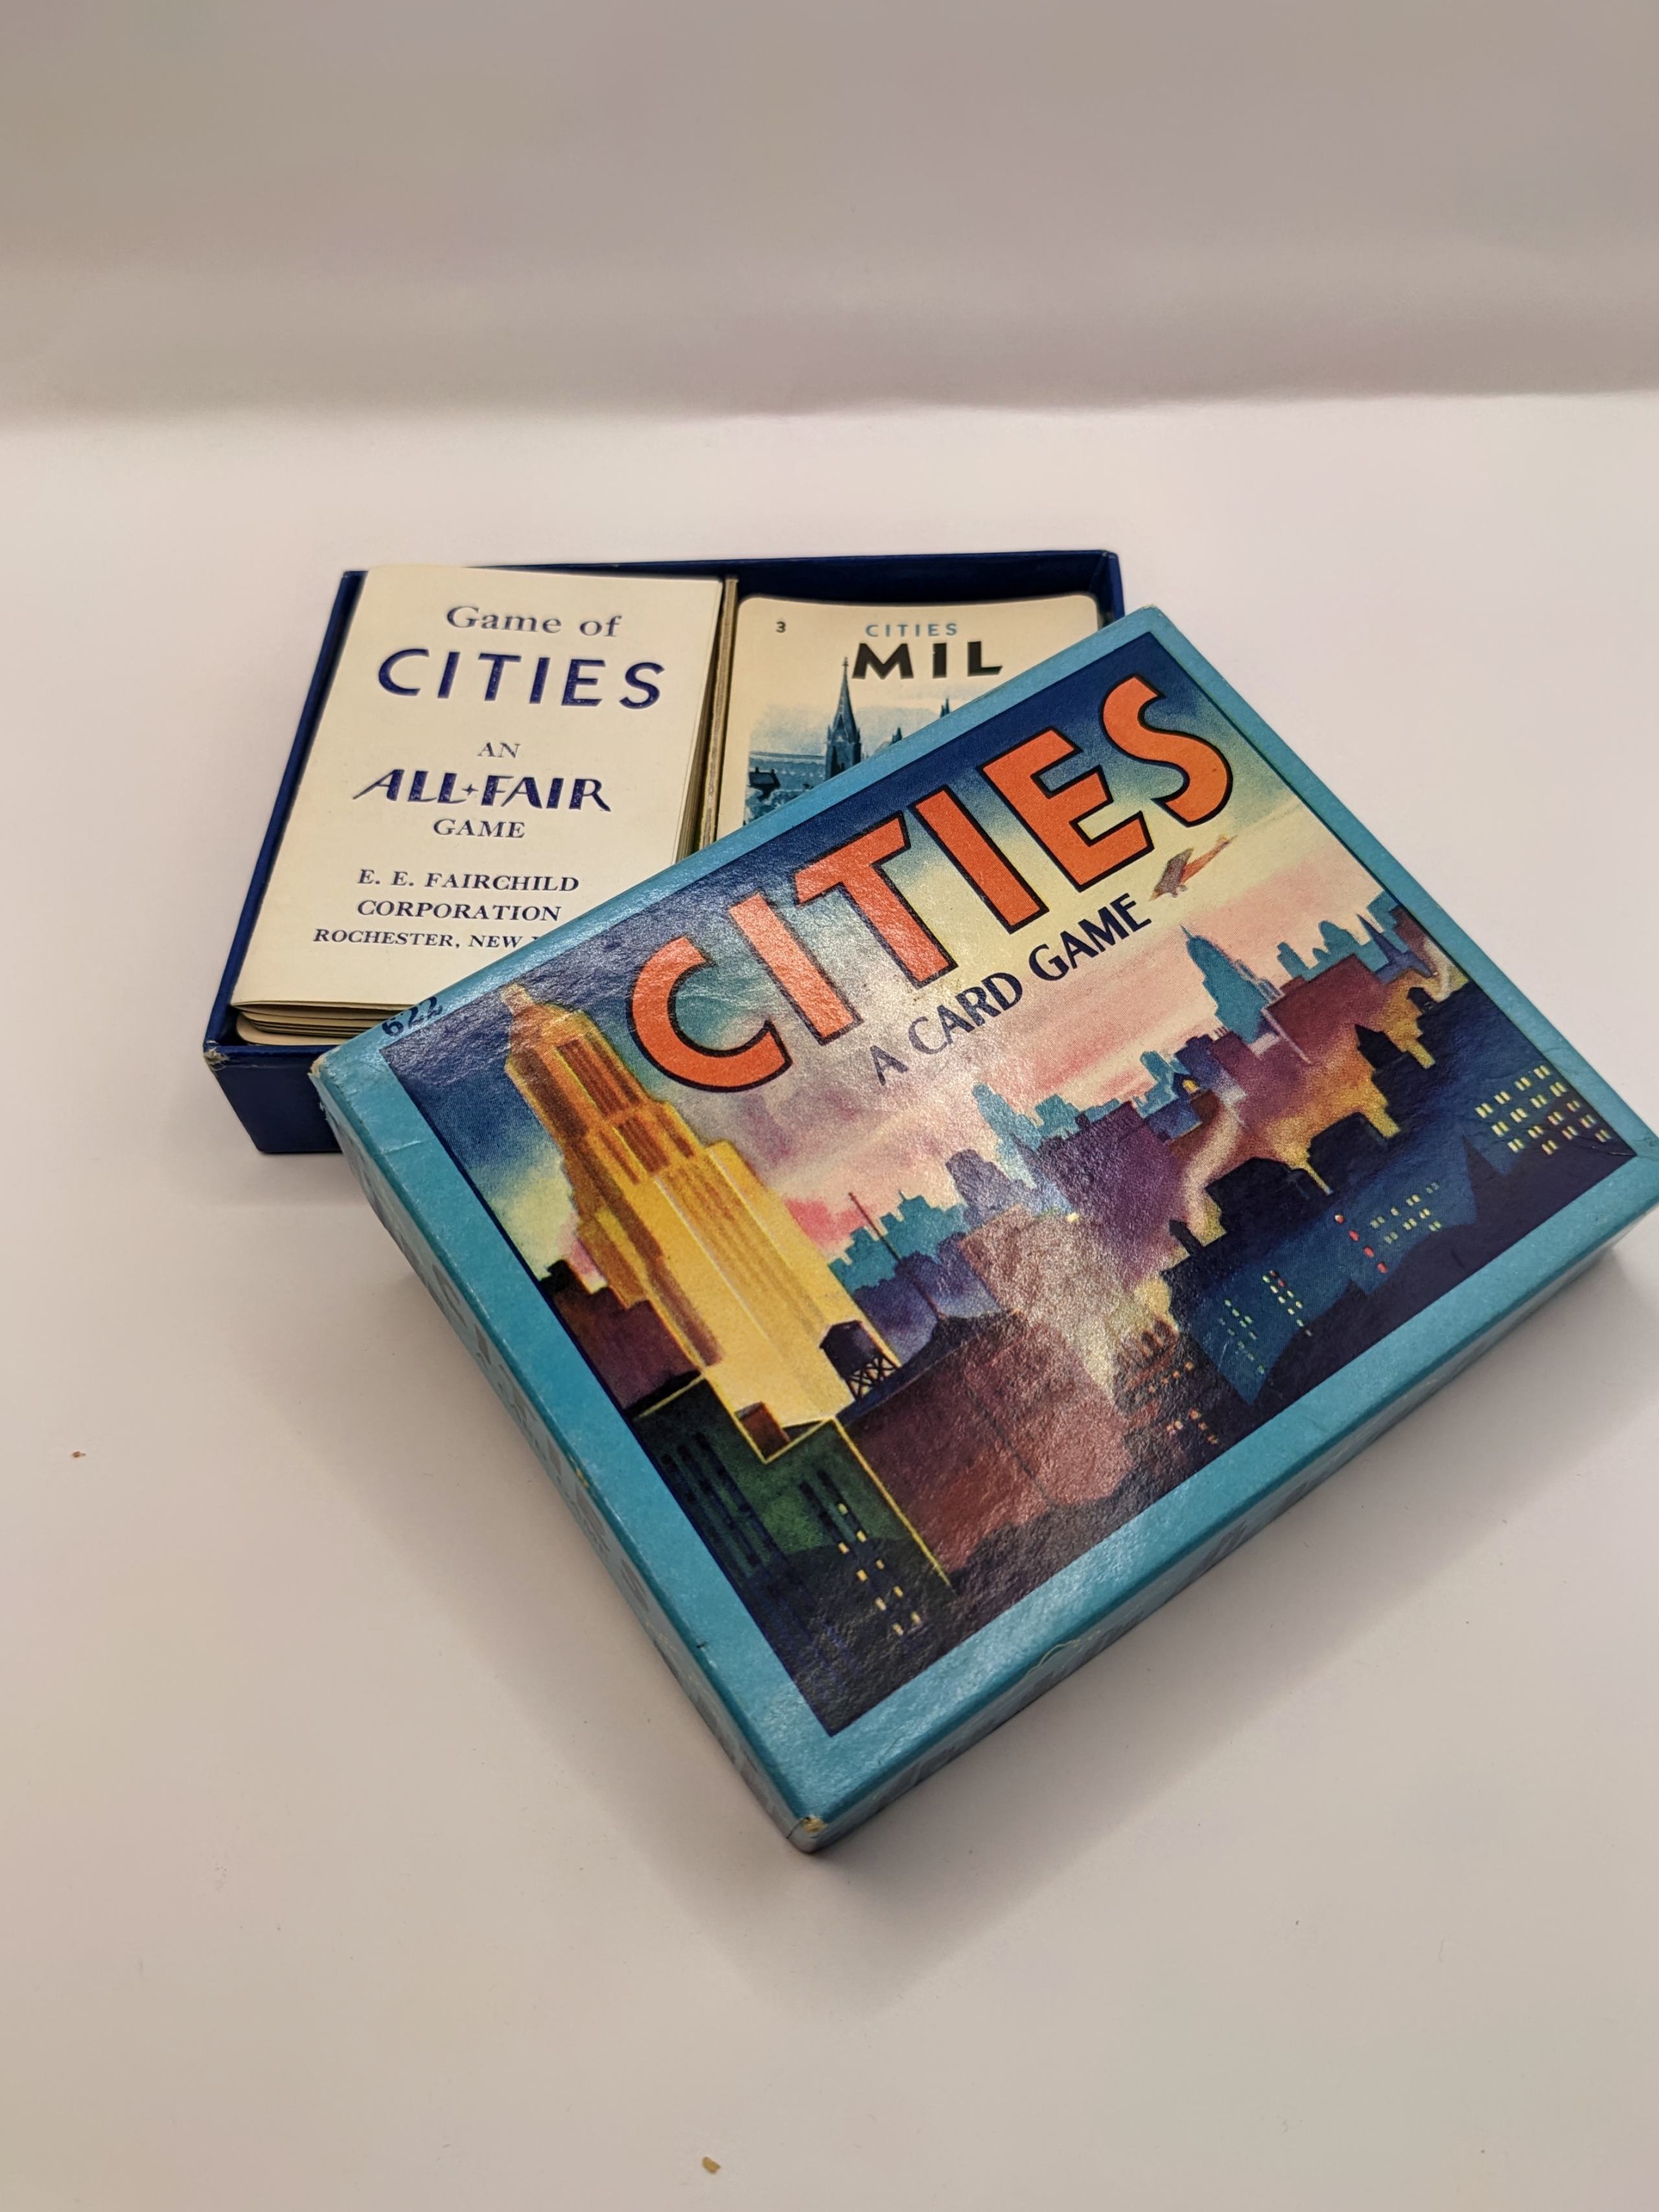 Photo of the mid-century "Cities: A Card Game." The box is open to show the rule booklet and a stack of city cards.